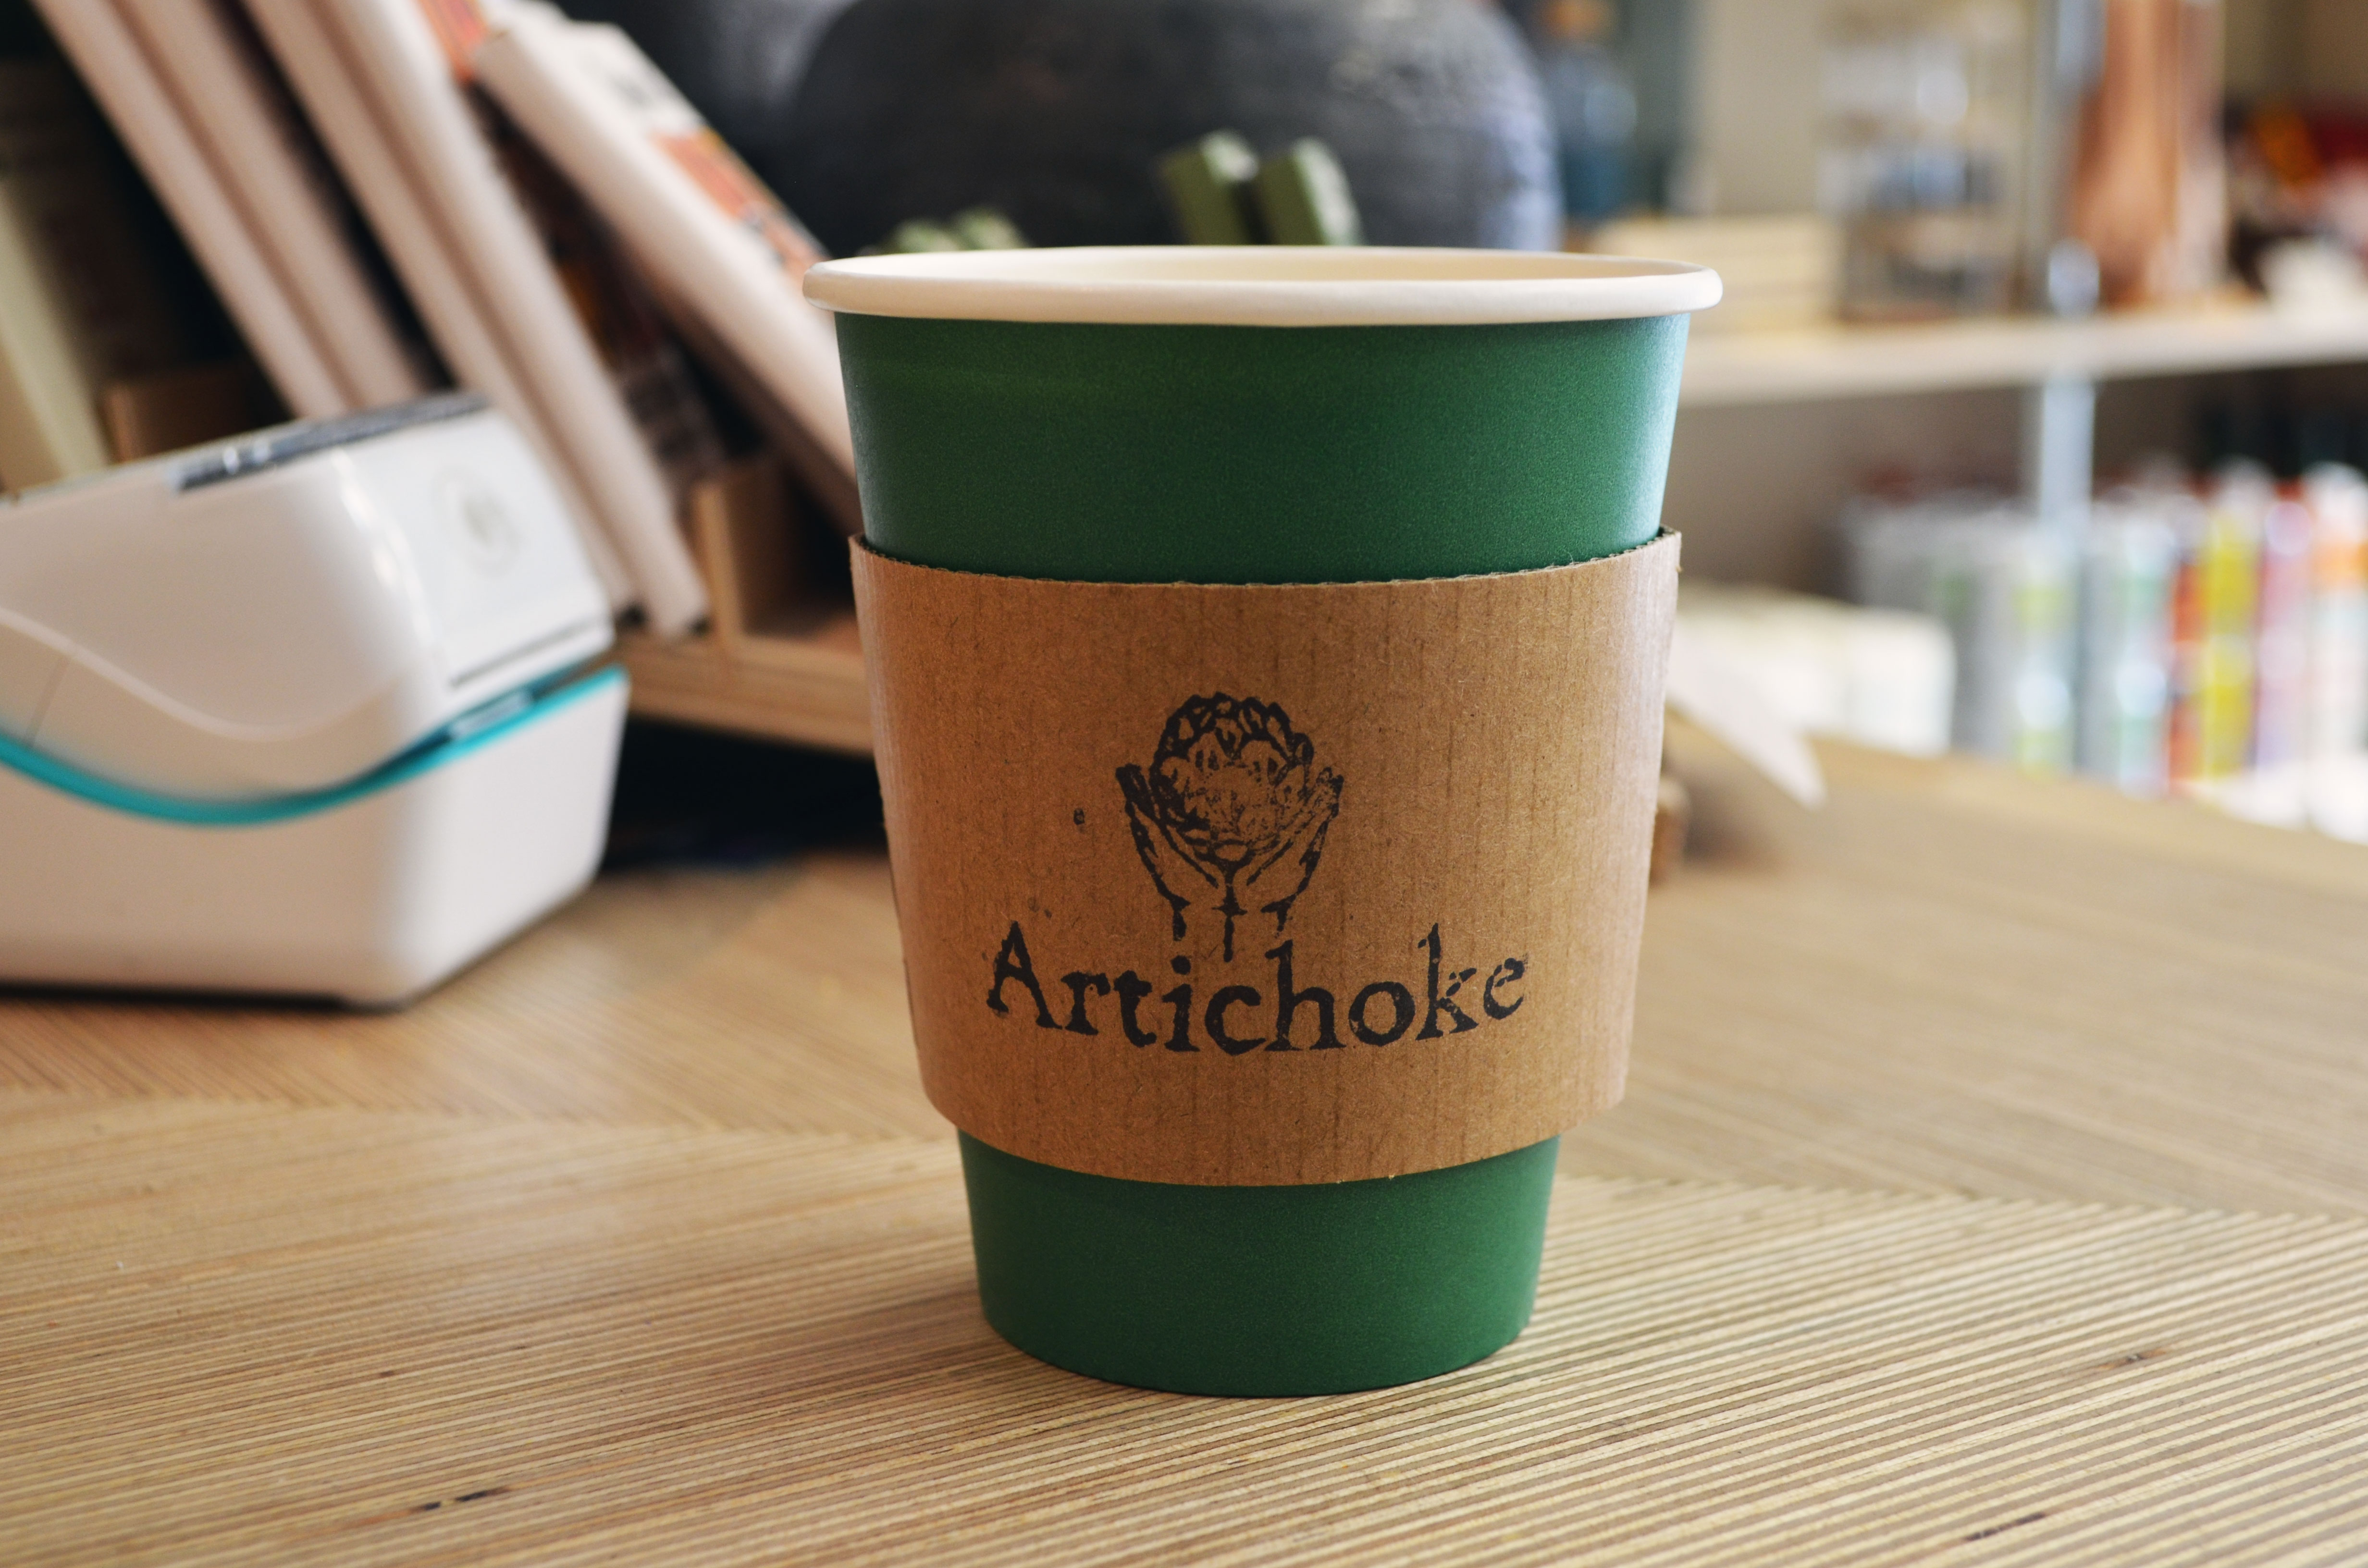 disposable coffee cup on a counter with Artichoke logo